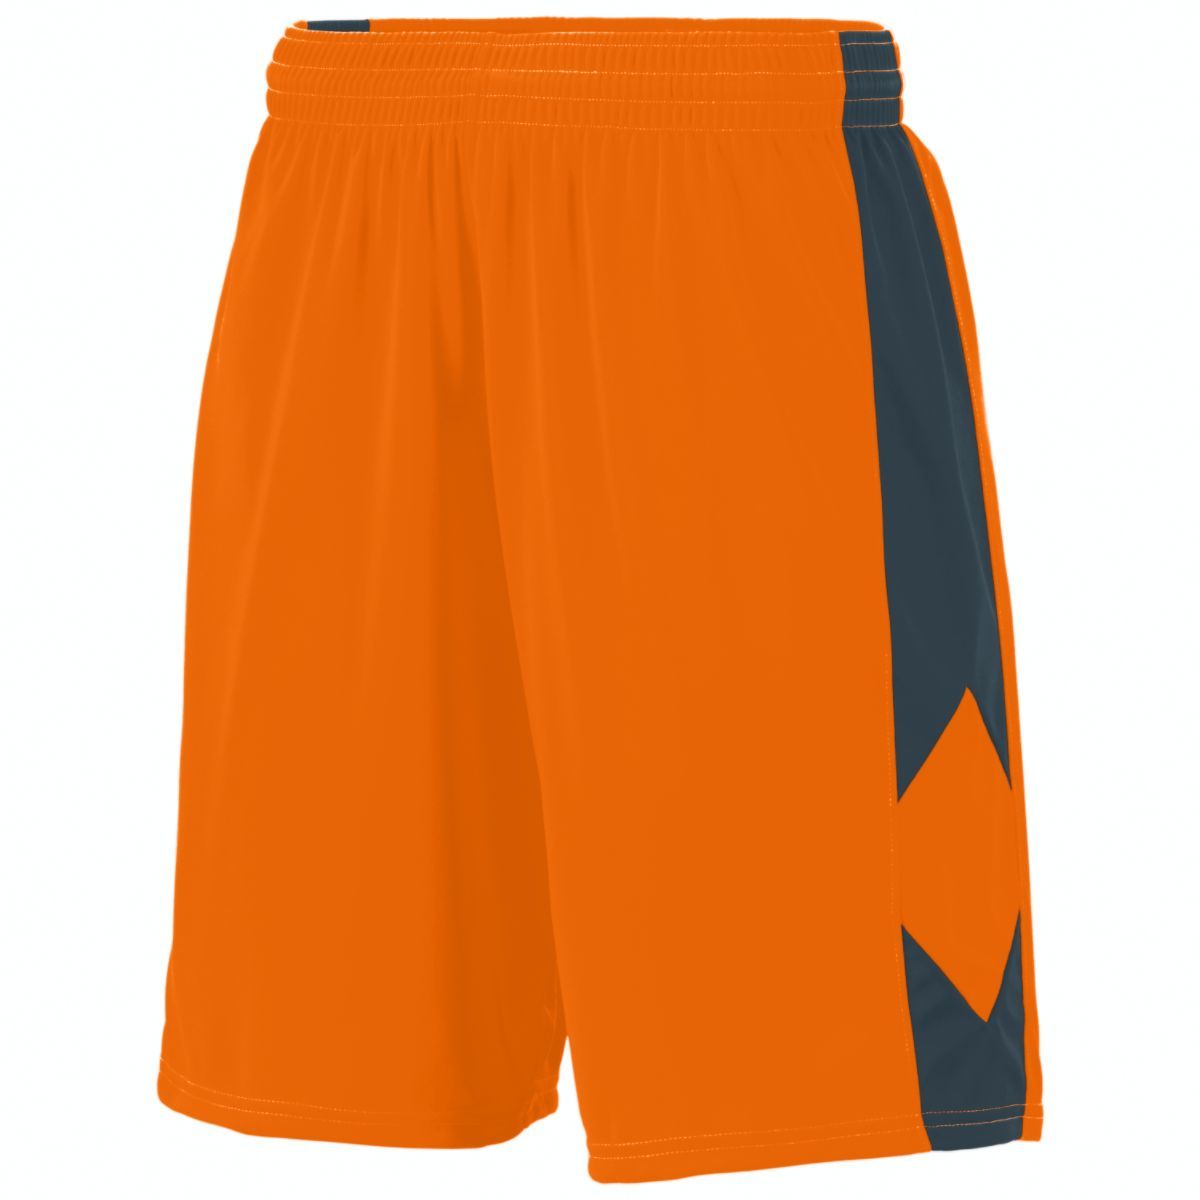 Augusta Sportswear Youth Block Out Shorts in Power Orange/Slate  -Part of the Youth, Youth-Shorts, Augusta-Products, Basketball, All-Sports, All-Sports-1 product lines at KanaleyCreations.com